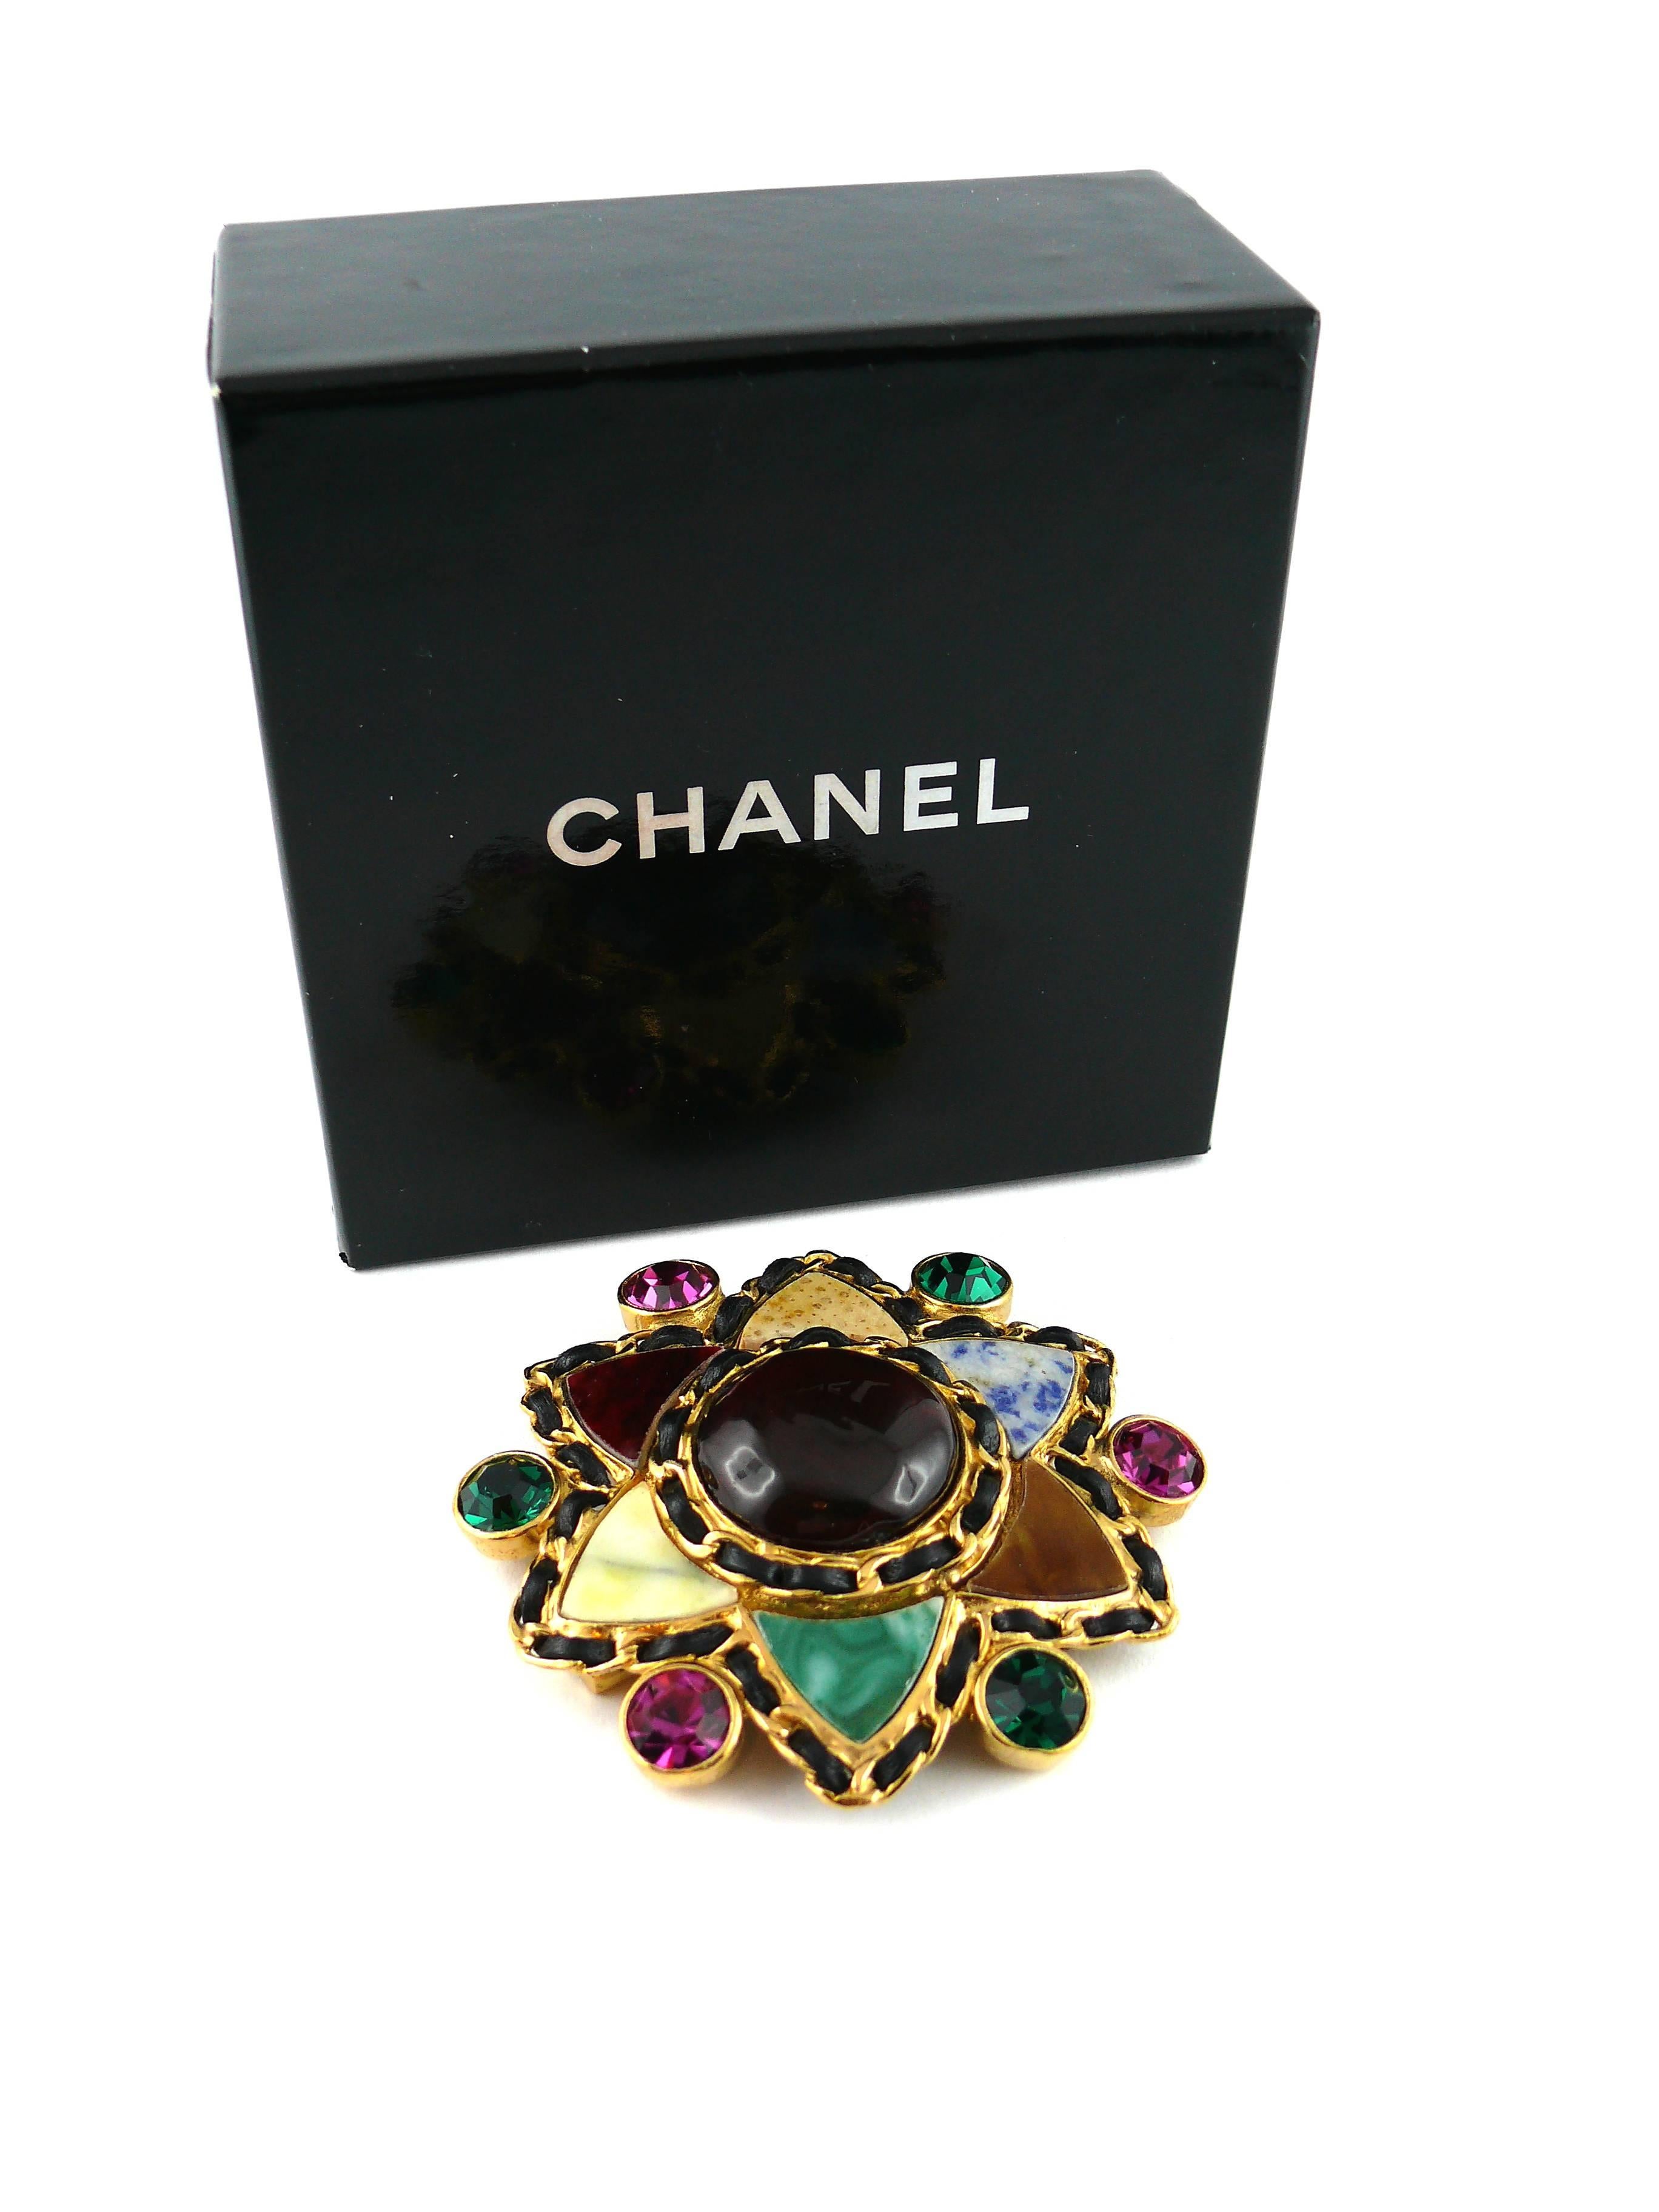 CHANEL massive vintage star brooch featuring a large Maison Gripoix red glass cabochon adorned with hardstone stone elements, multi colored crystals and intertwined leather detail.

This stunning brooch featured on the 1995 CHANEL Collection cover